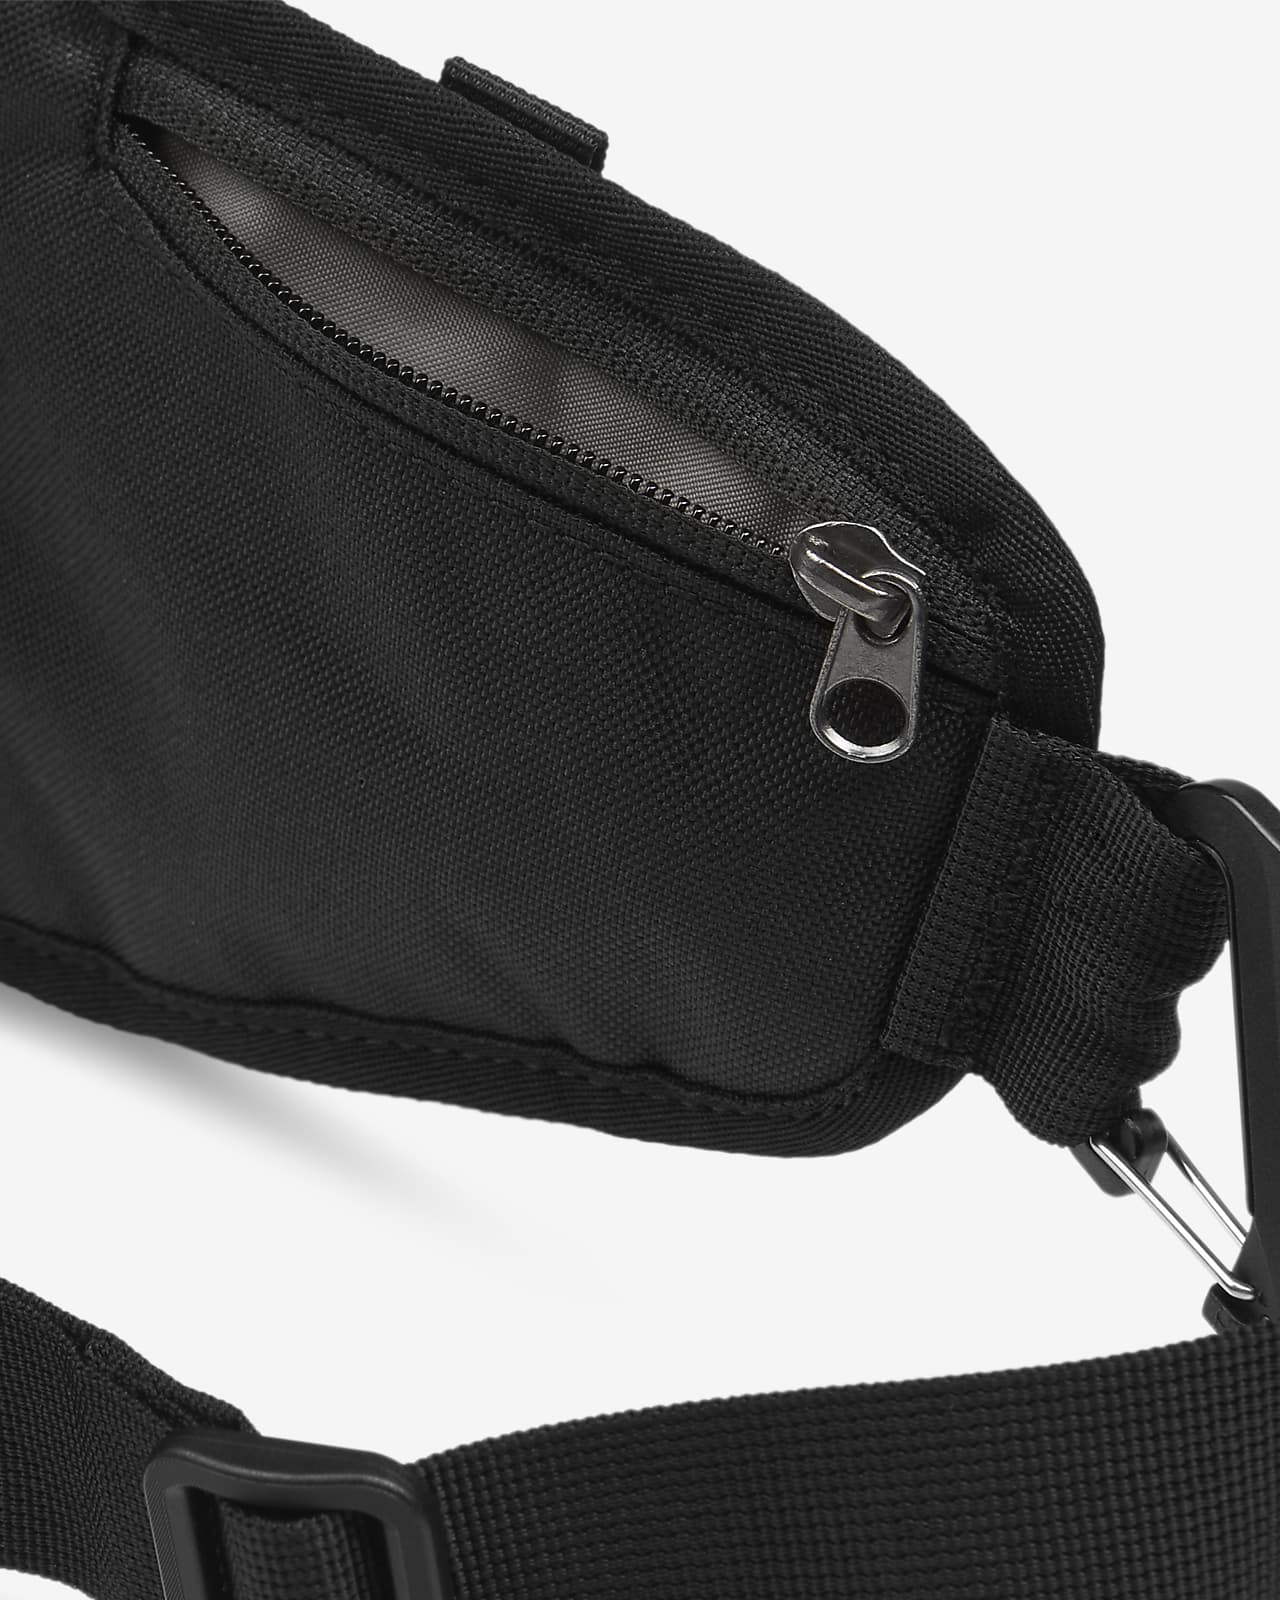 nike leather fanny pack